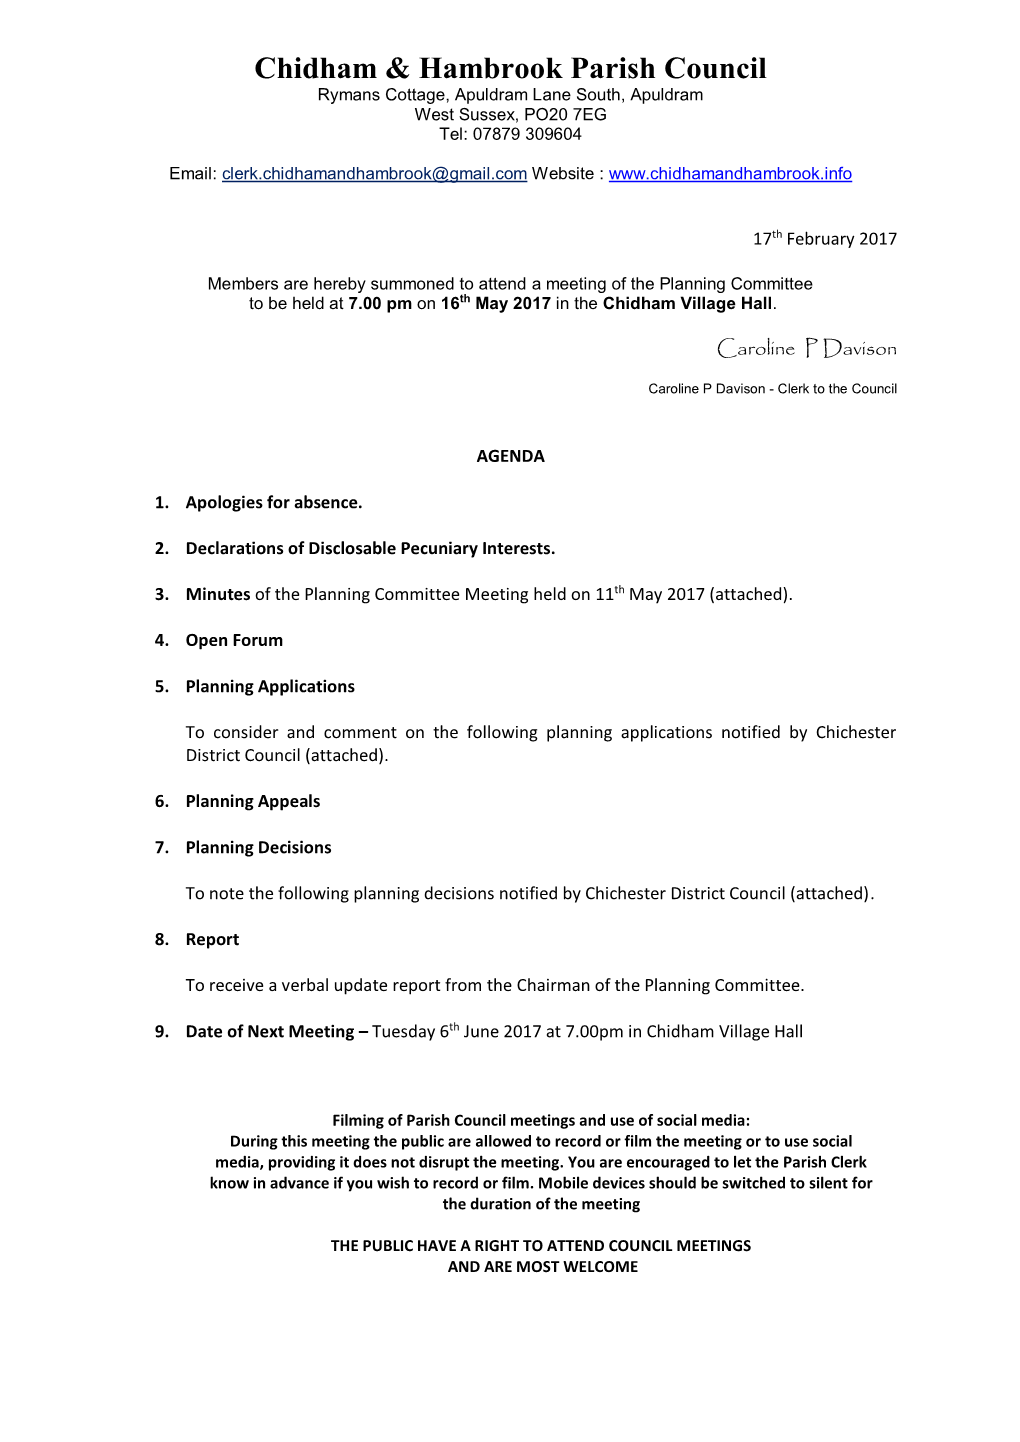 Agenda for Planning Committee